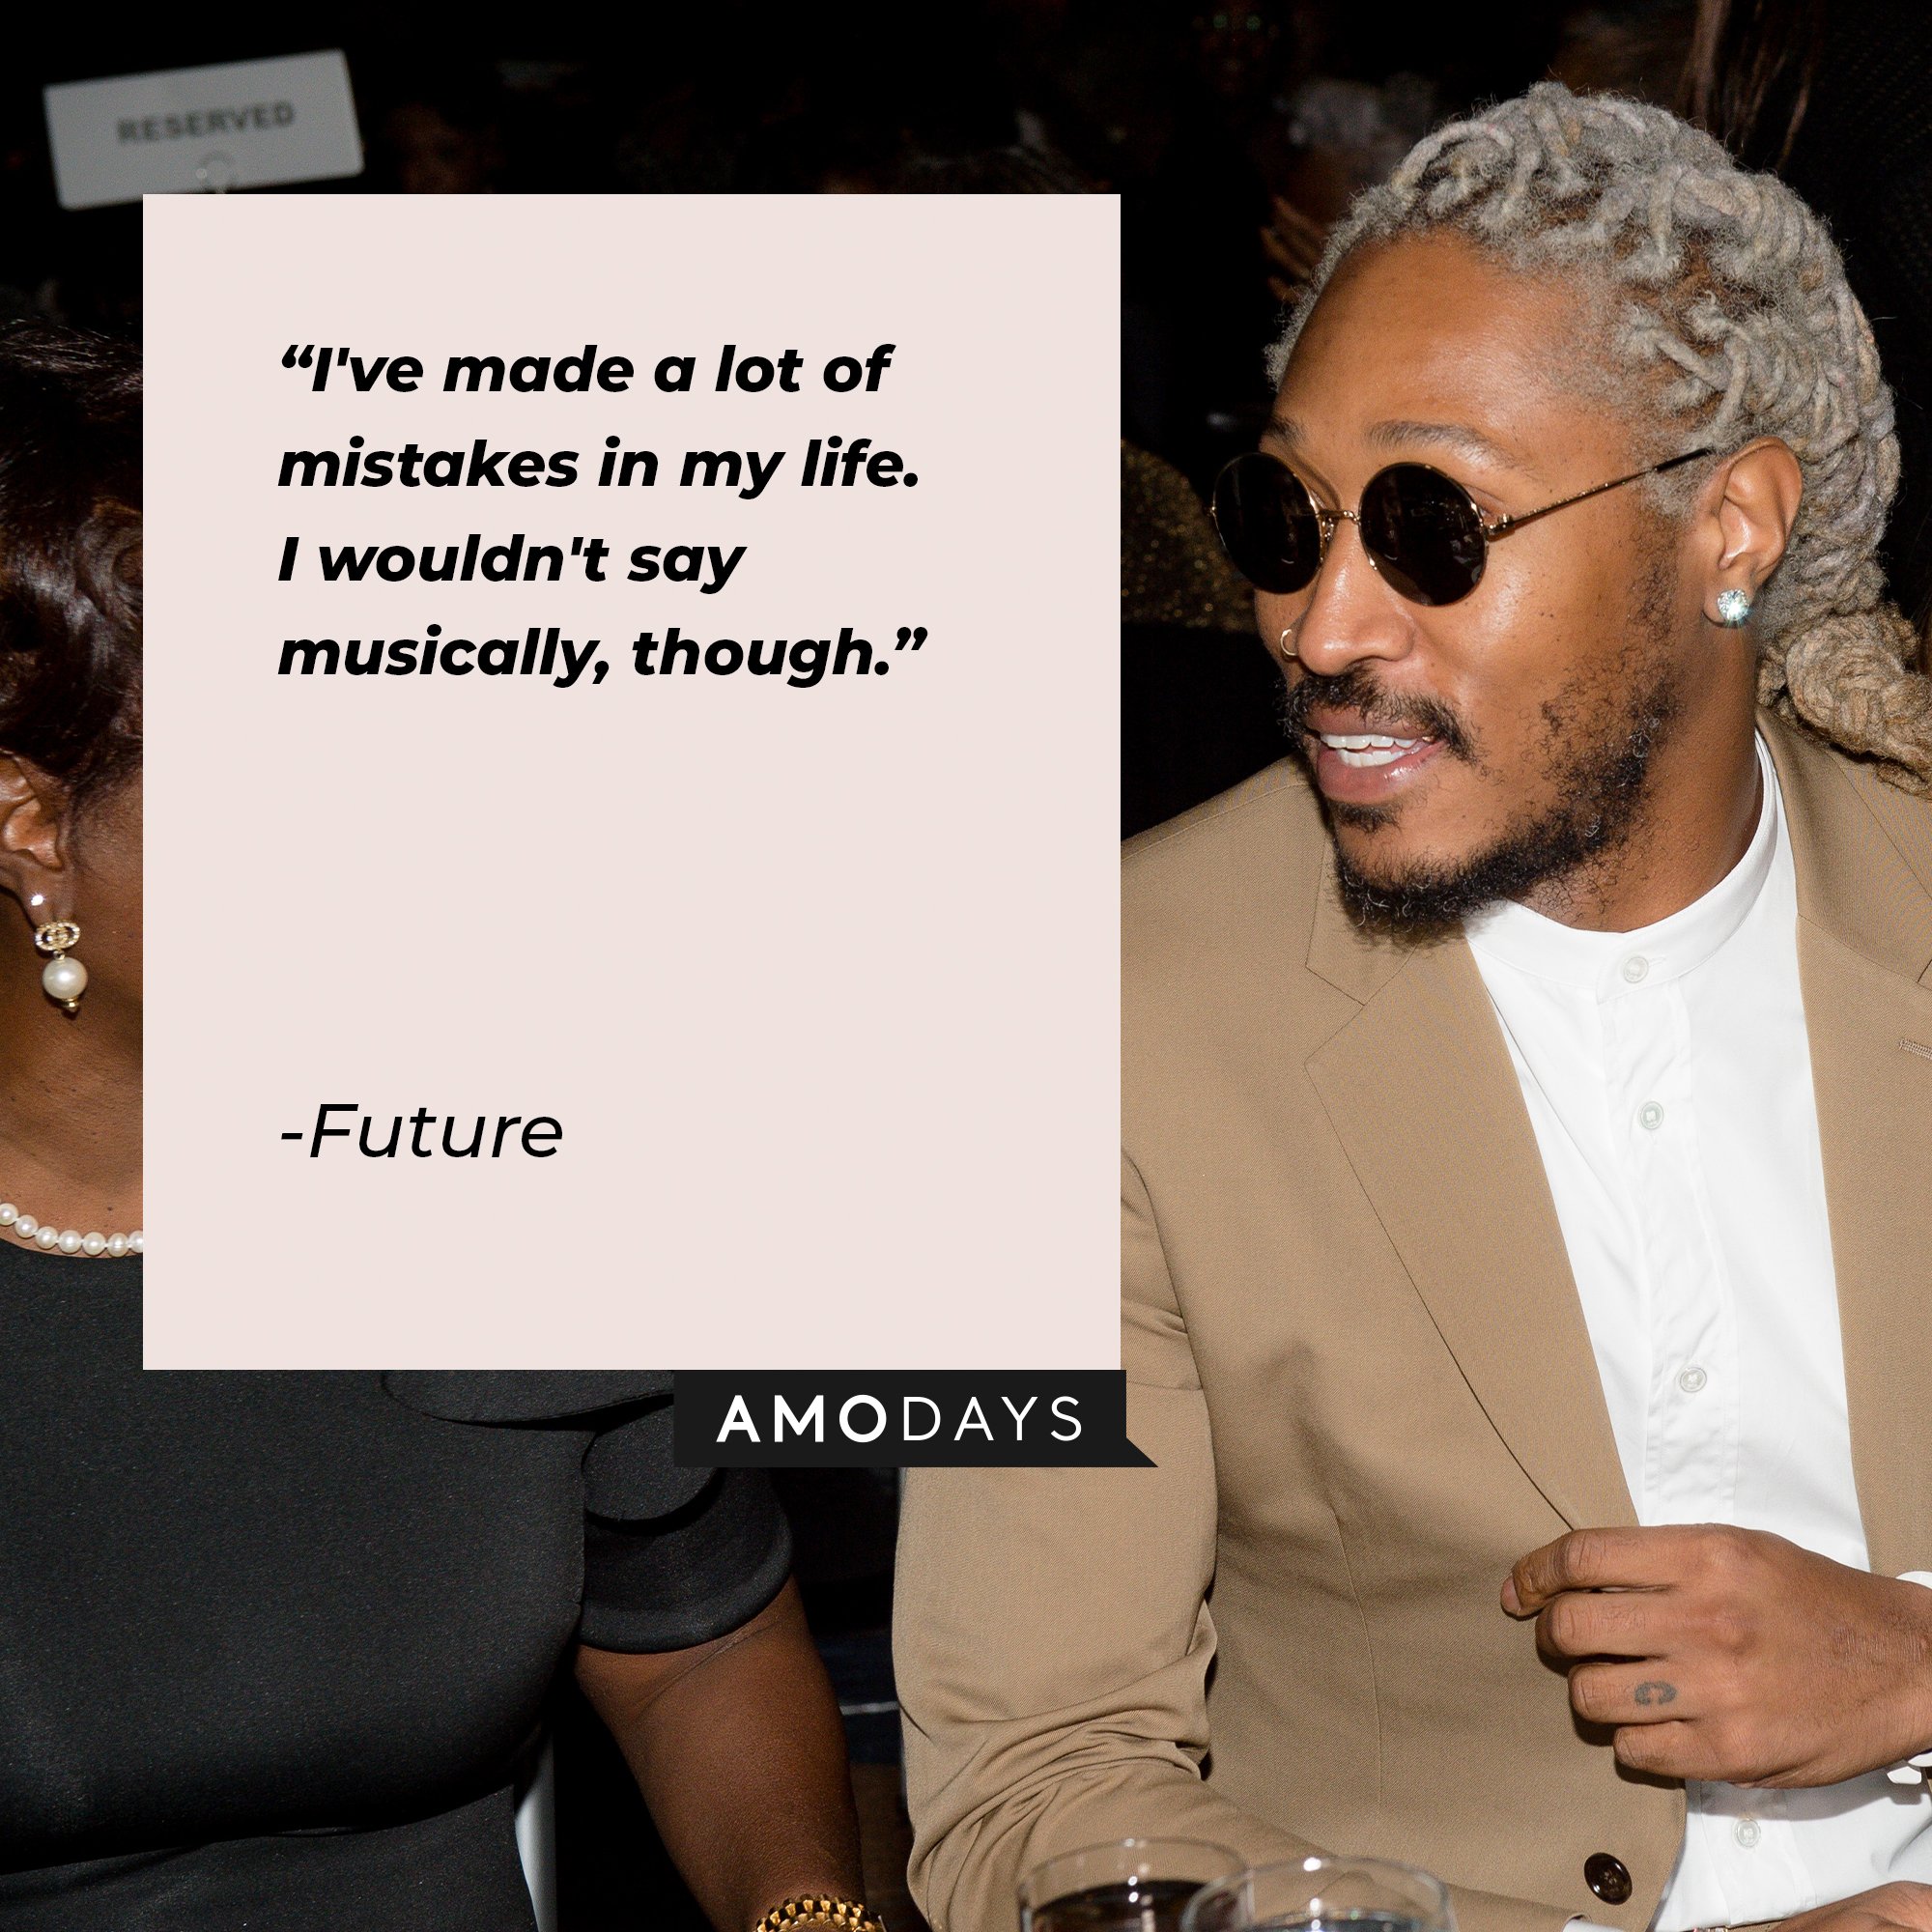 Future’s quote: "I've made a lot of mistakes in my life. I wouldn't say musically, though." | Image: AmoDays